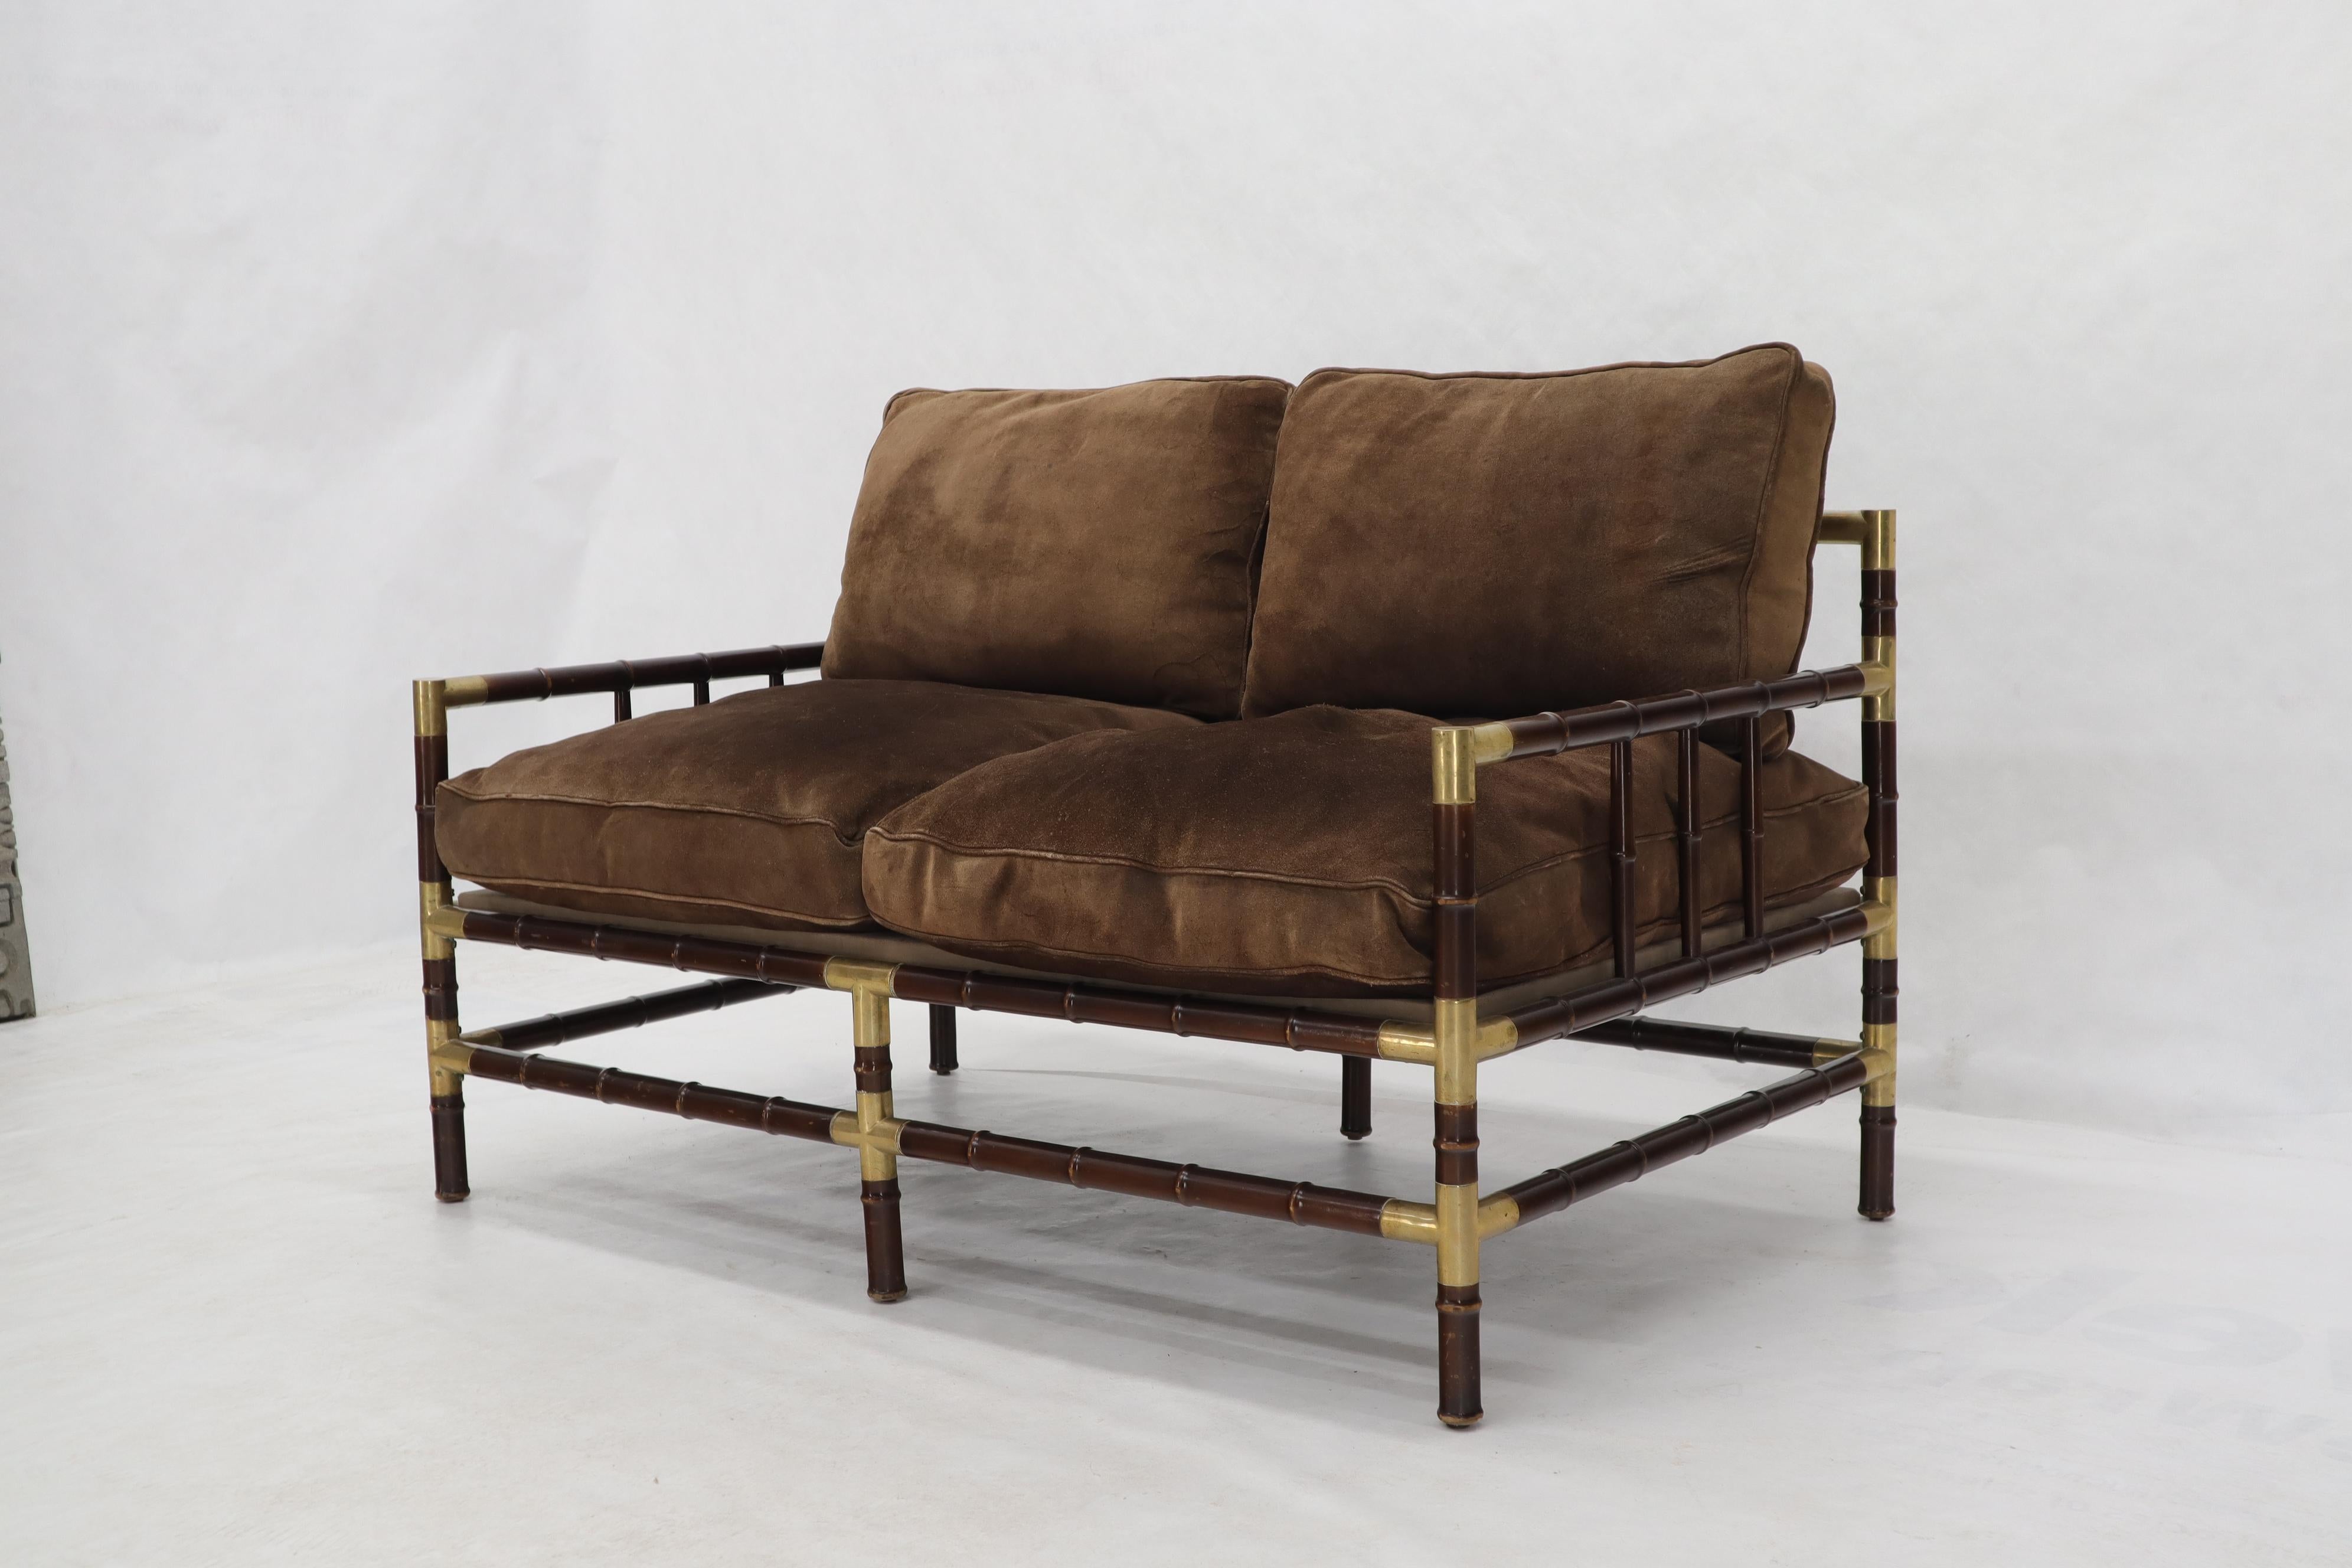 Brown Suede Upholstery Faux Bamboo Italian Mid-Century Modern Settee Loveseat In Good Condition For Sale In Rockaway, NJ